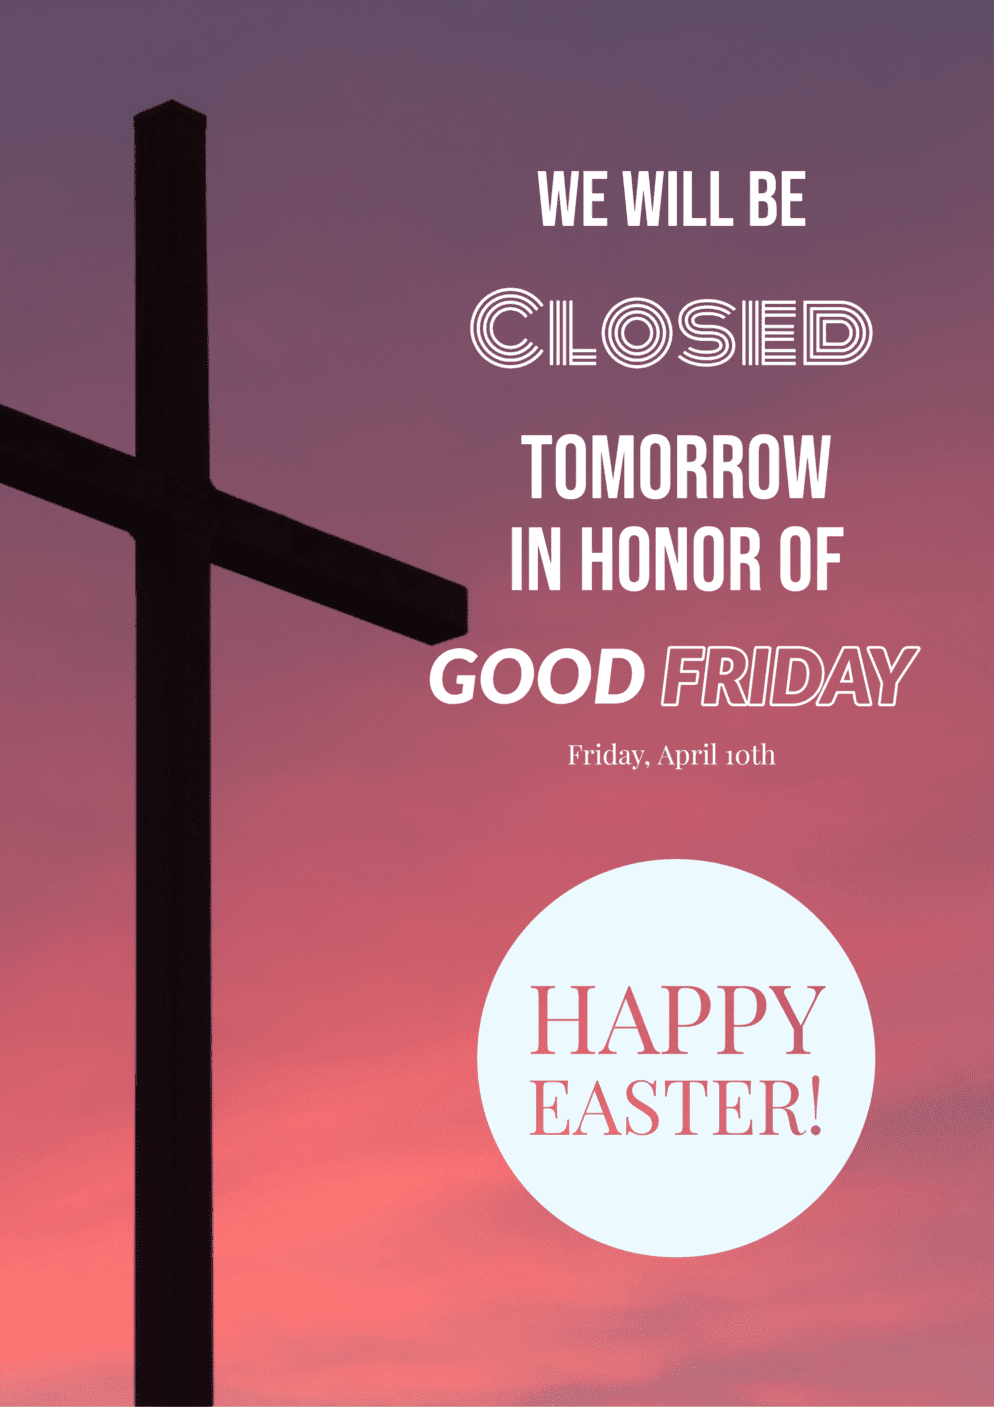 Closed on Good Friday Money Management Services